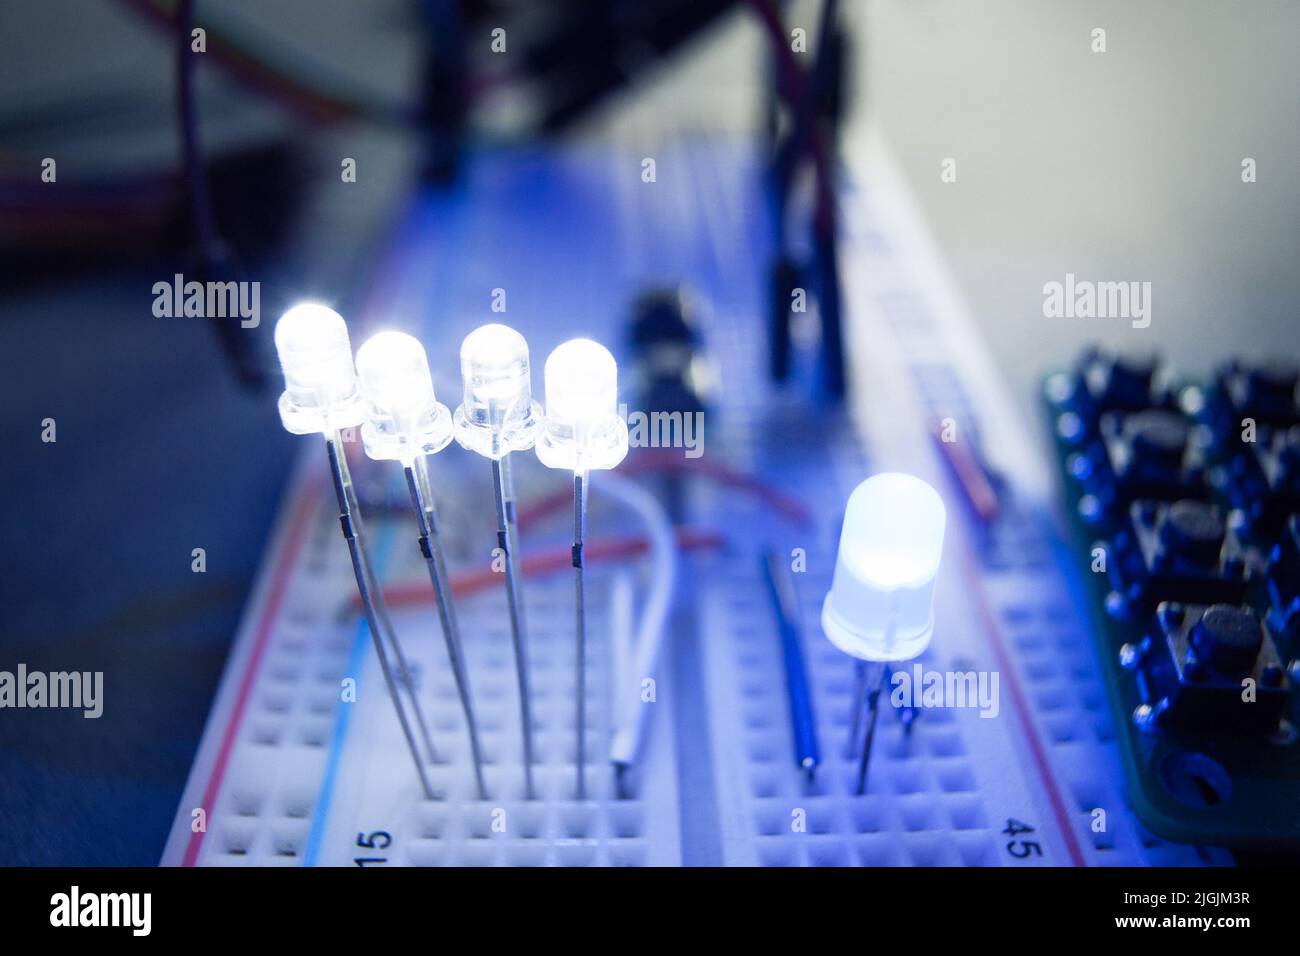 LED Light-emitting diodes on electrical breadboard Stock Photo